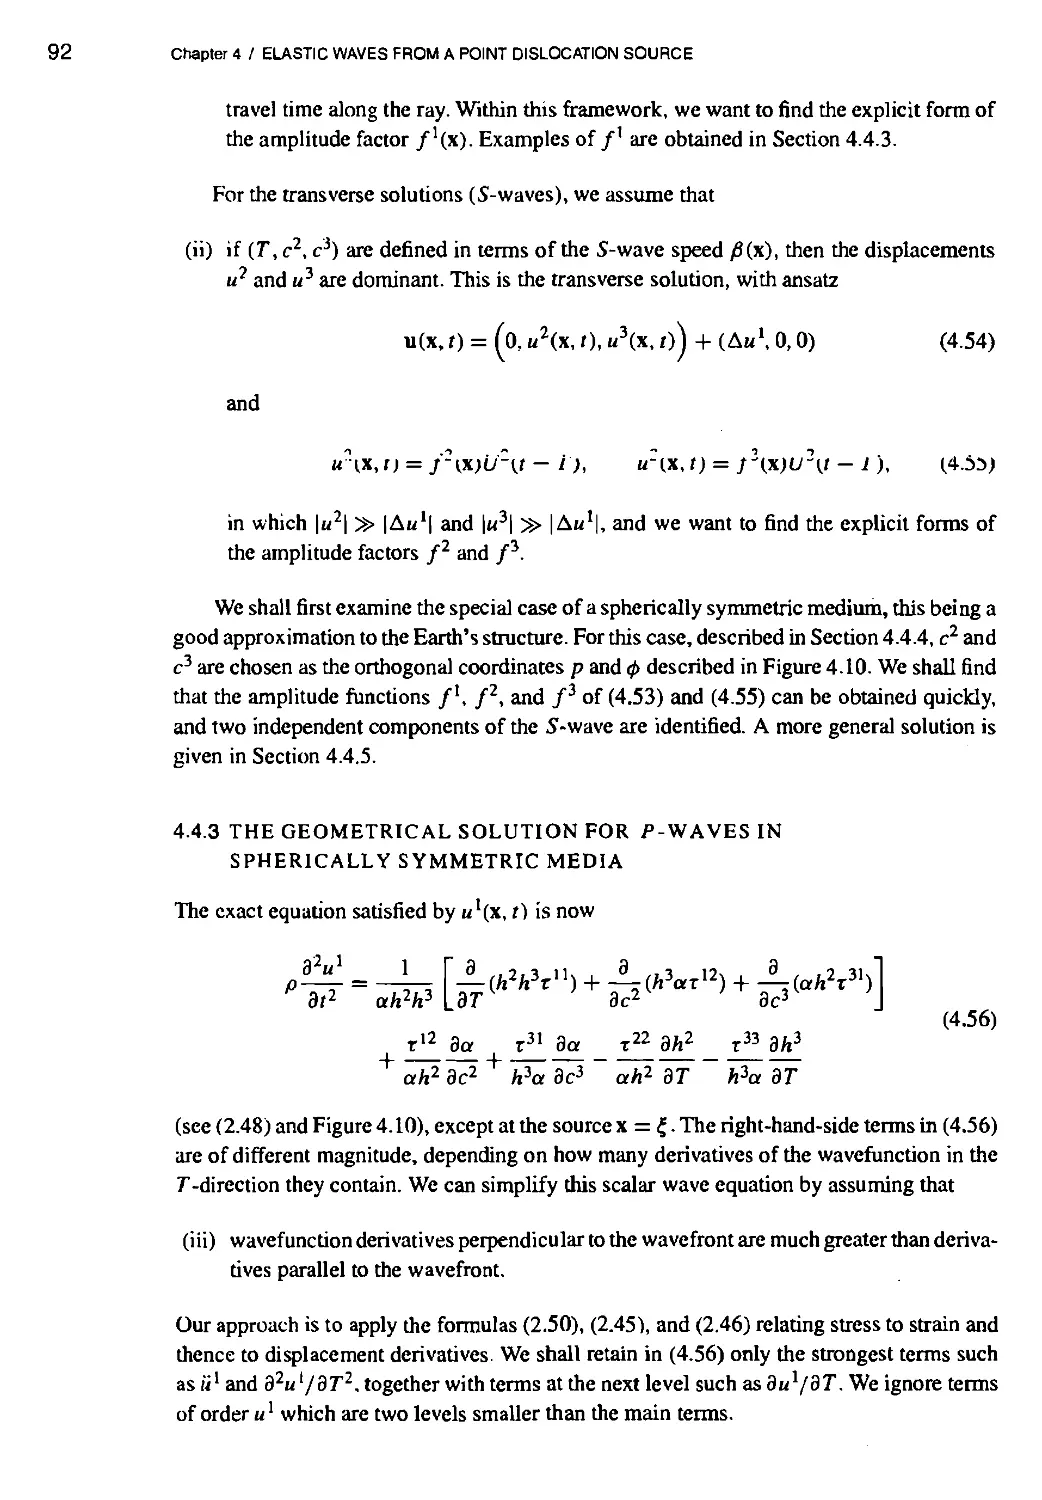 4.4.3 The geometrical solution for $P$-waves in spherically symmetric media